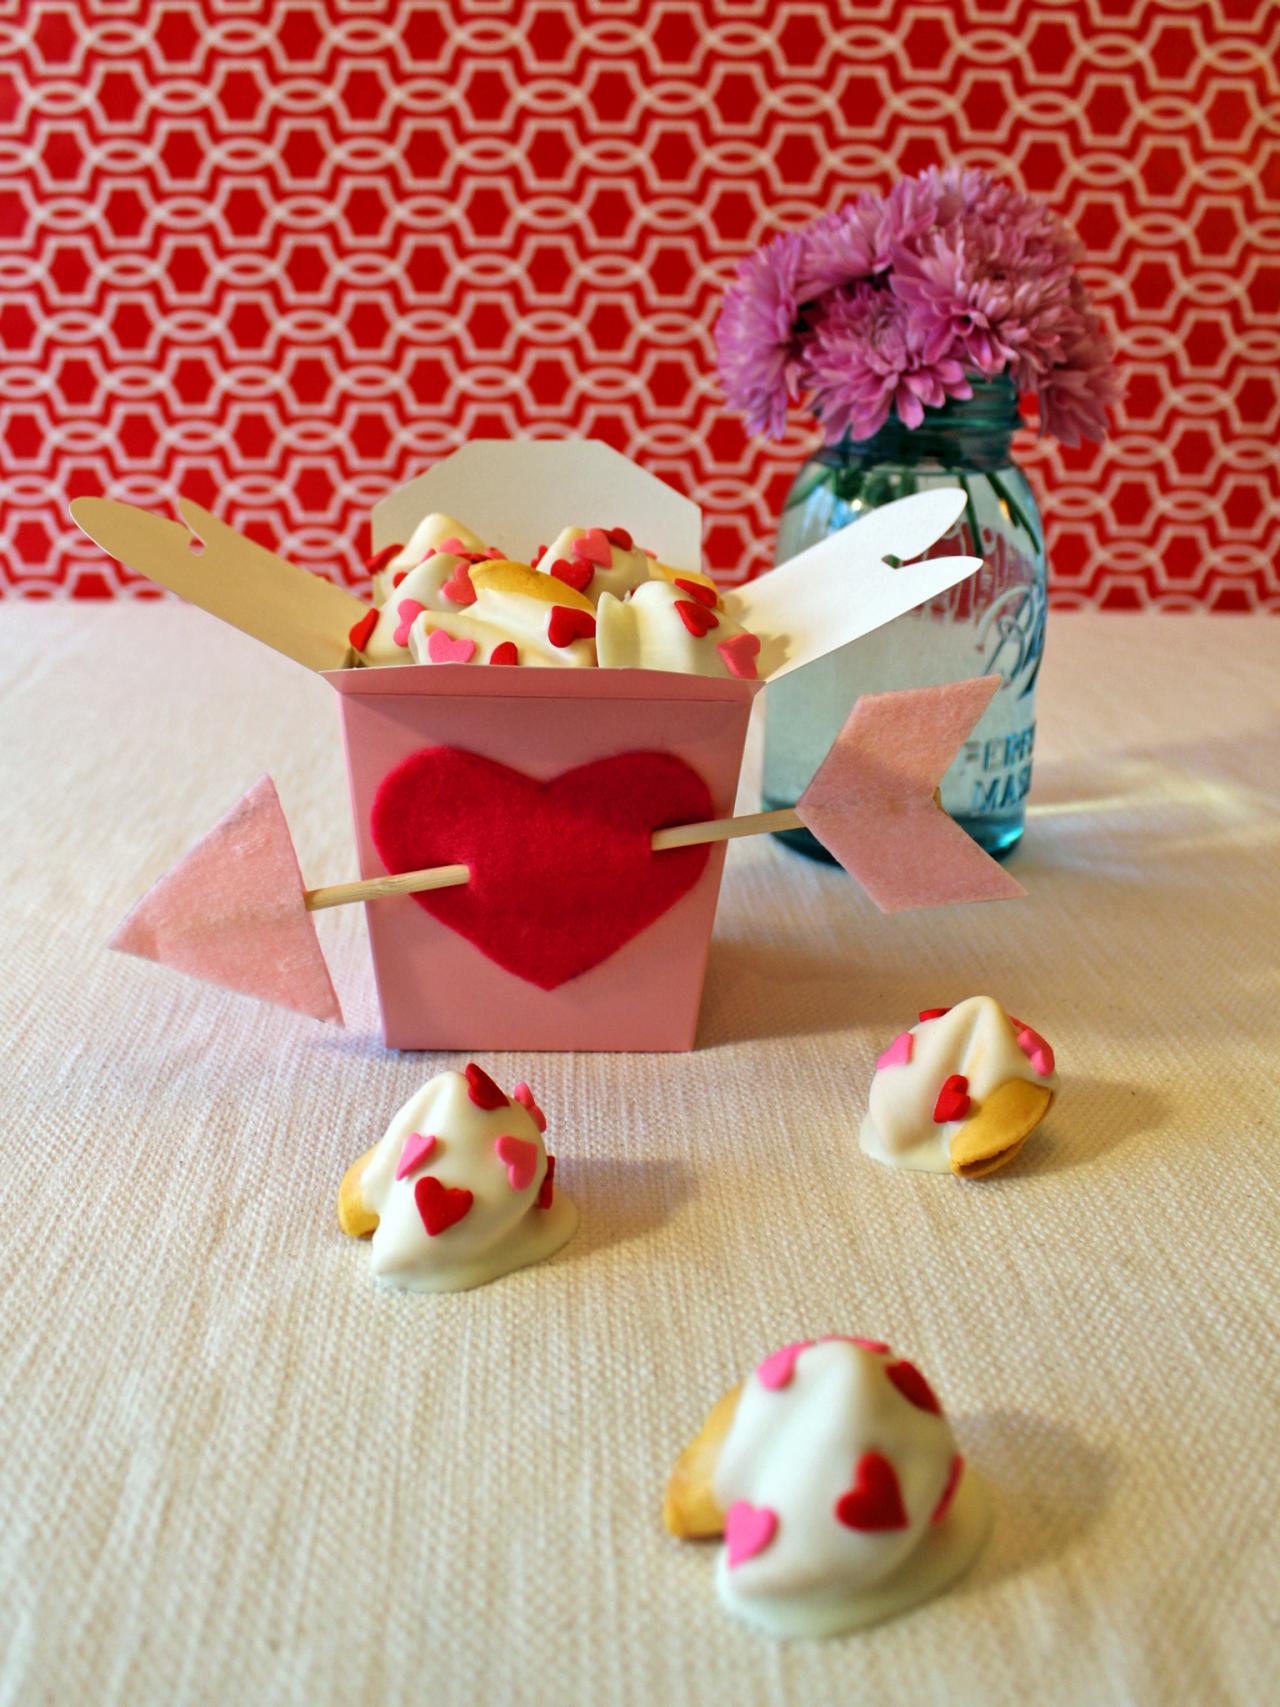 Valentine's Day Gift Ideas for Teachers - Joy in the Works